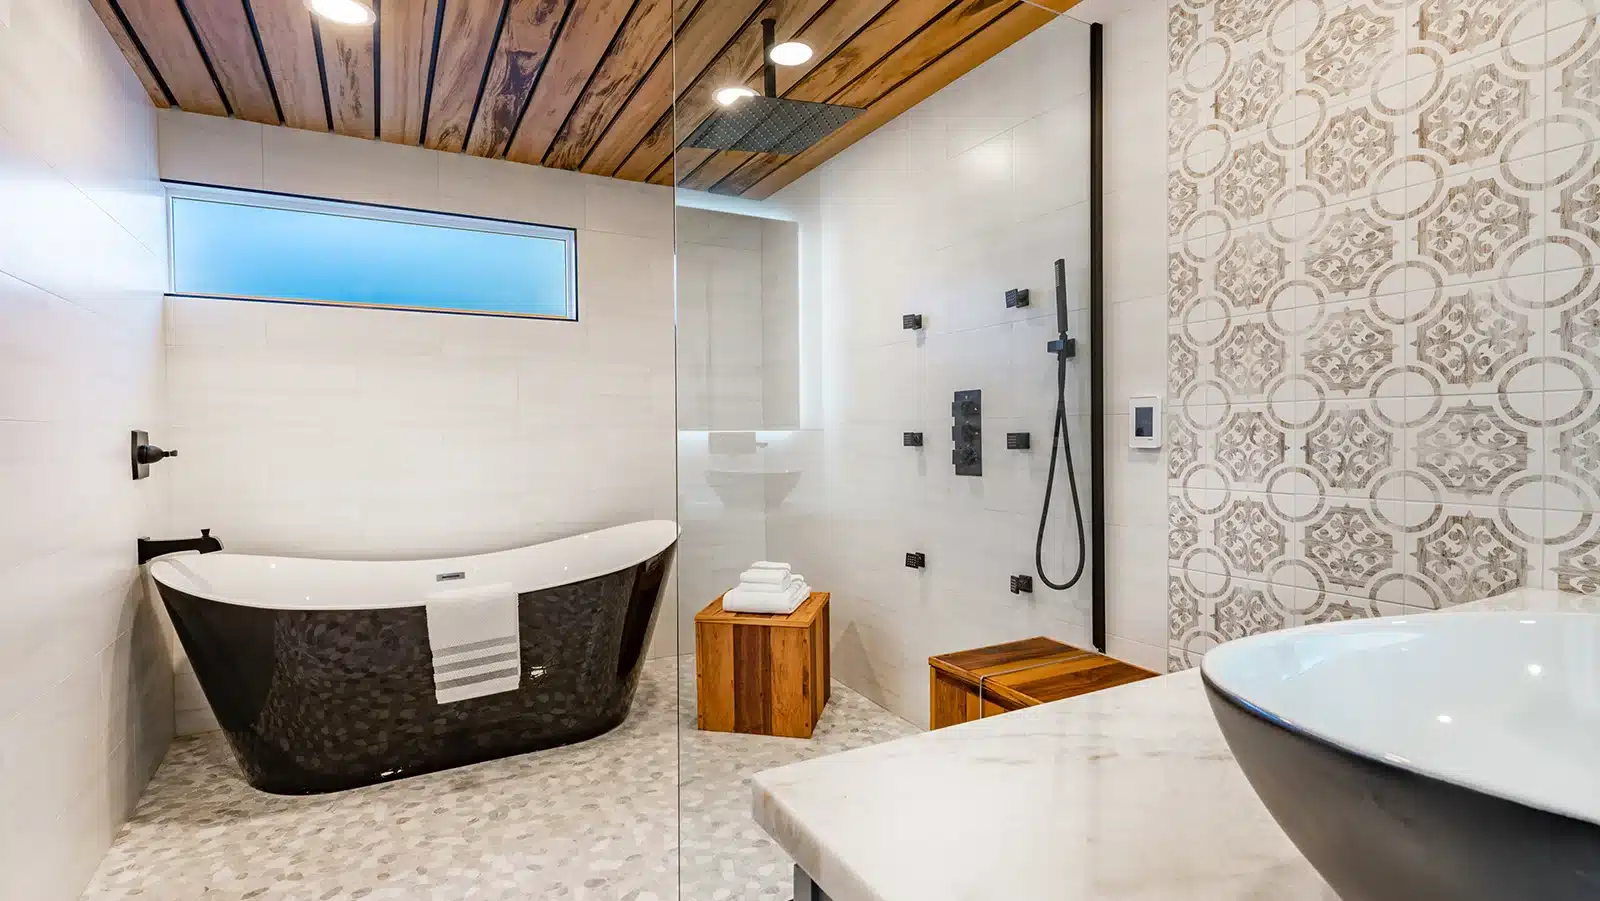 Modern and stylish bathroom with a freestanding black bathtub, tiled walk-in shower, wooden accents, and patterned wall tiles.